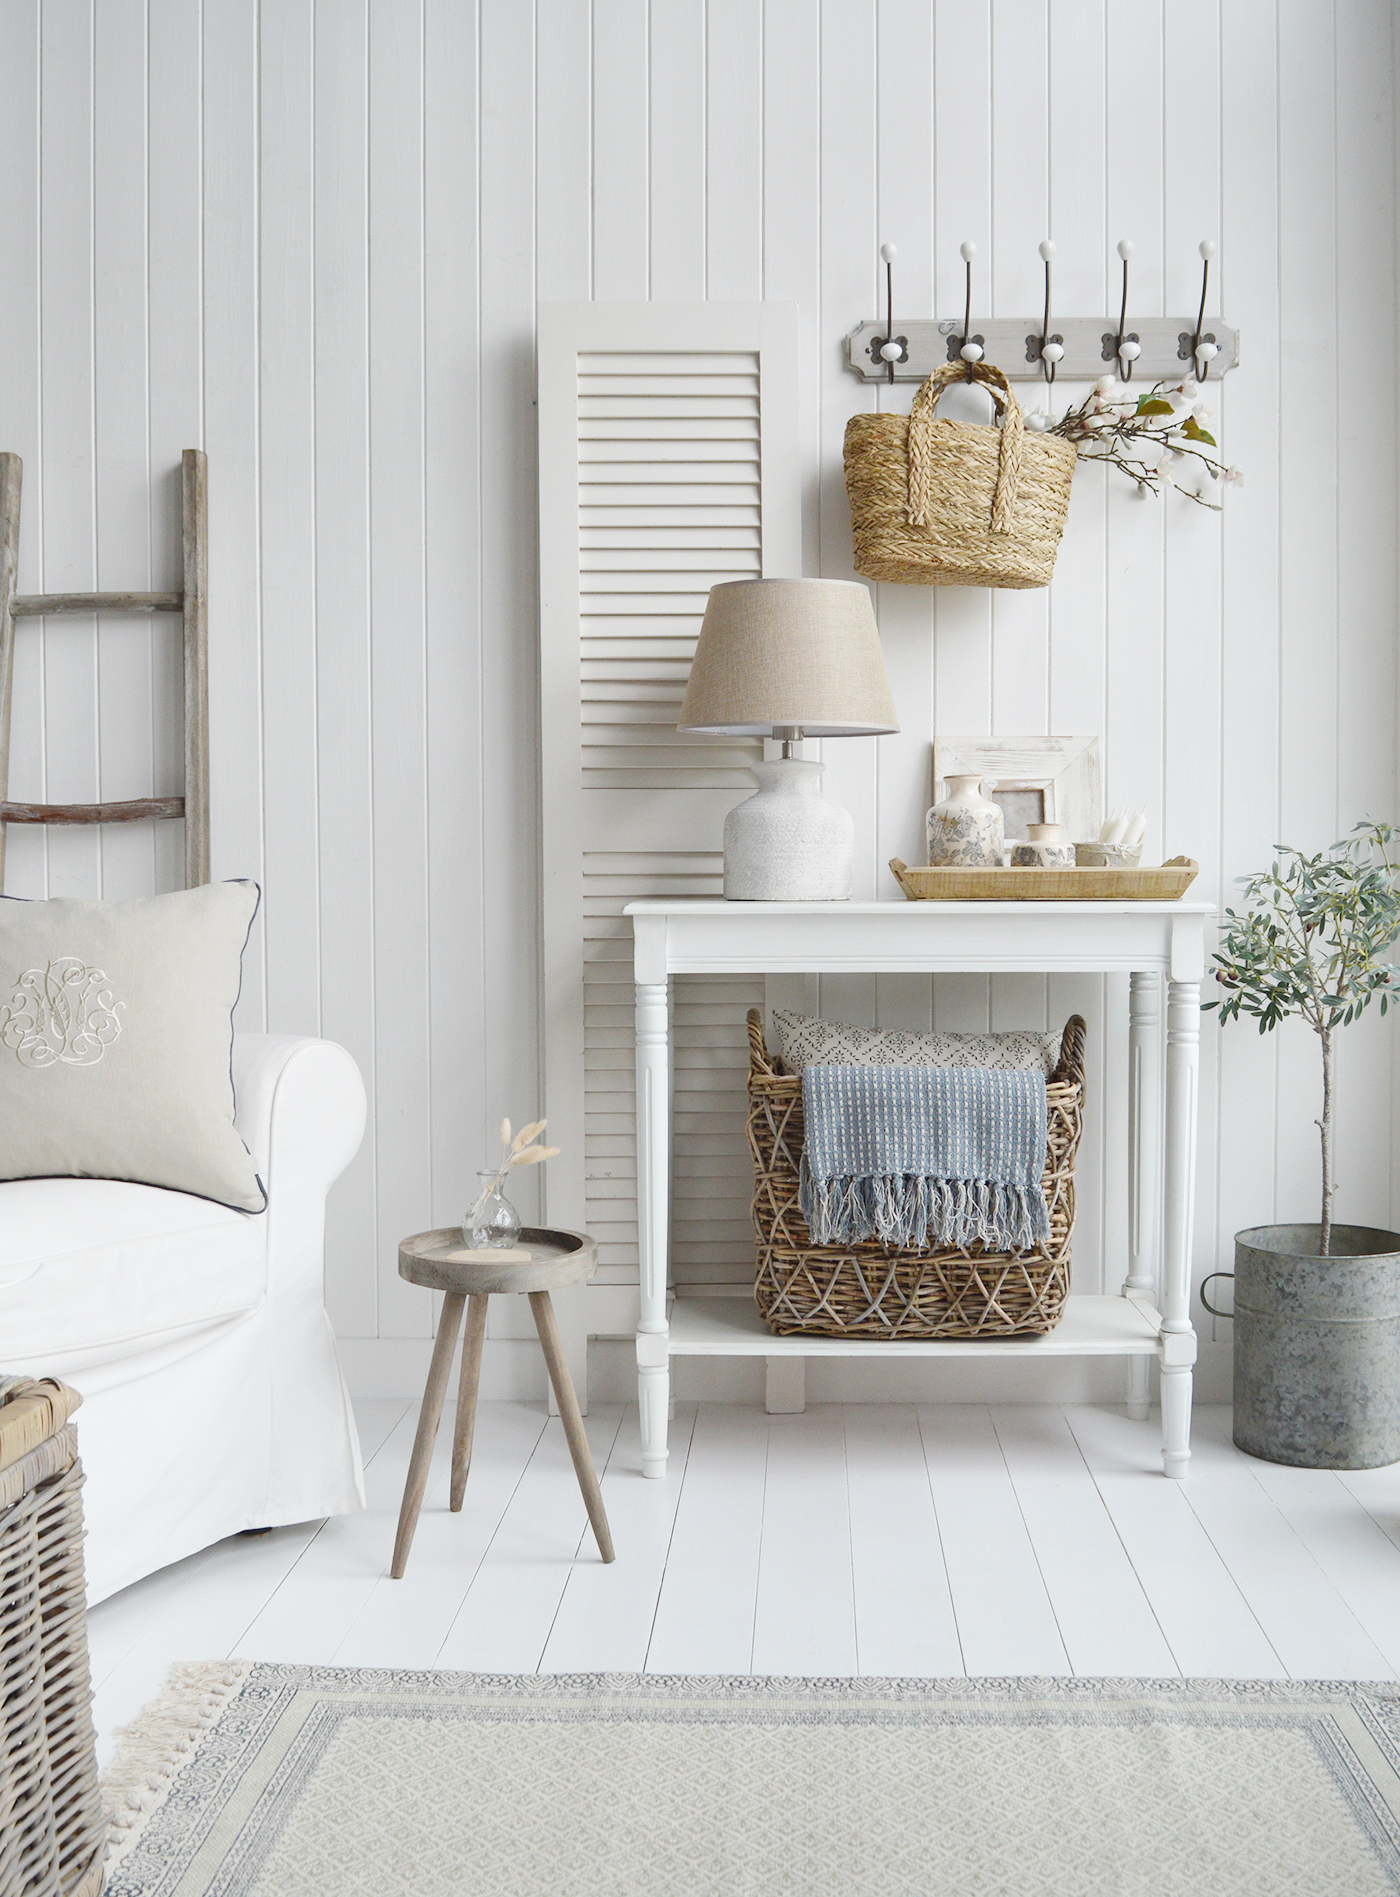 New England furniture for coastal, modern farmhouse and country homes in the UK. The Cape Ann range of white furniture, versatile and match various color schemes